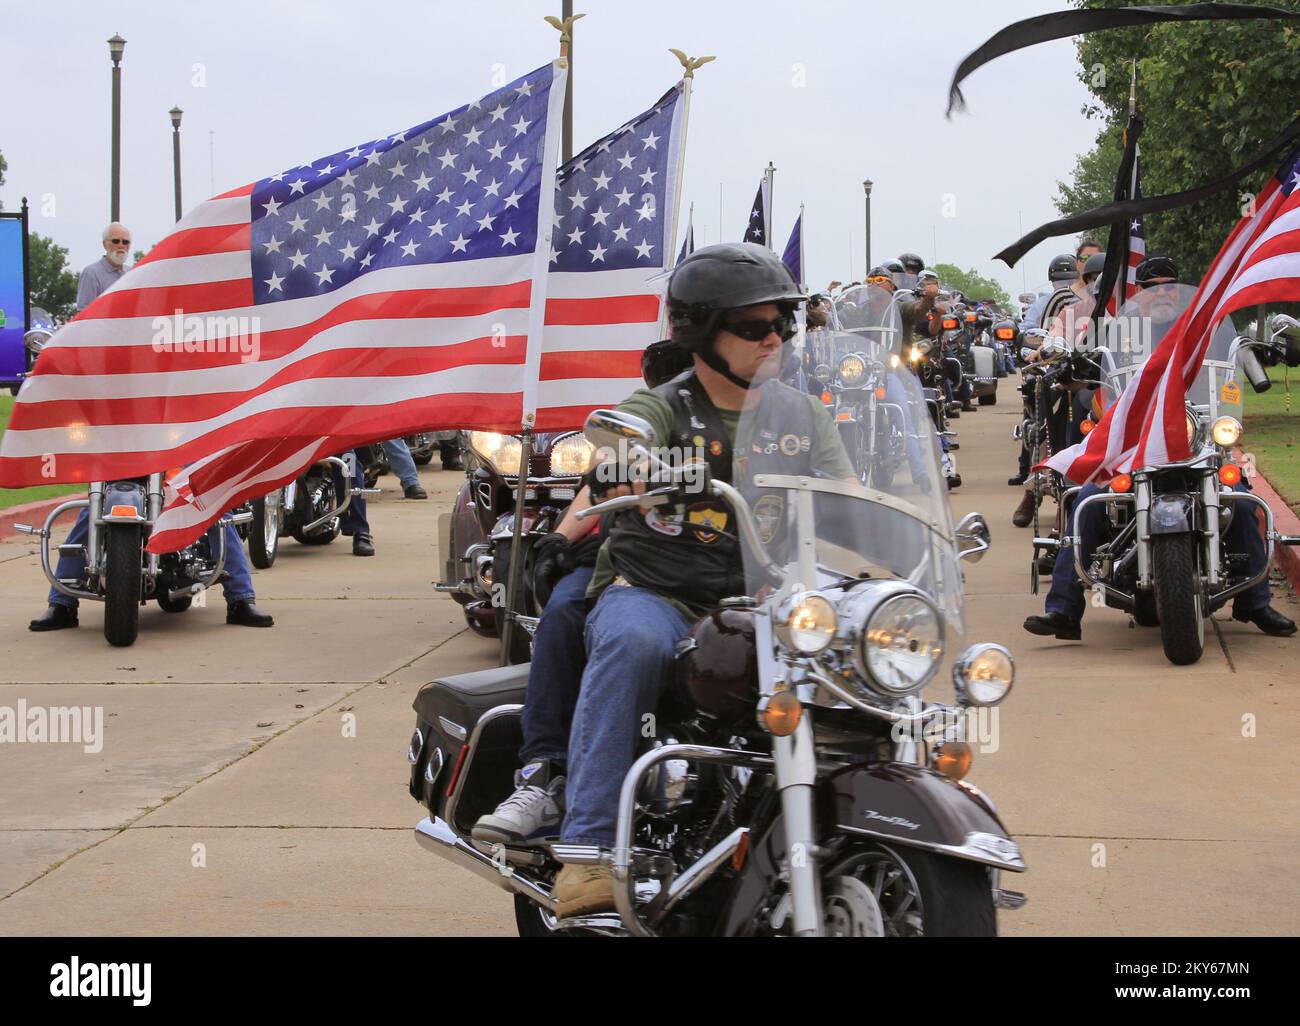 Moore, Okla., May 23, 2013   Patriot Guard Riders participated in a mass ride in support of the families who lost loved ones to the May 20 tornado. President Obama declared the area a federal disaster and FEMA is providing assistance to affected individuals and families.  .. Photographs Relating to Disasters and Emergency Management Programs, Activities, and Officials Stock Photo